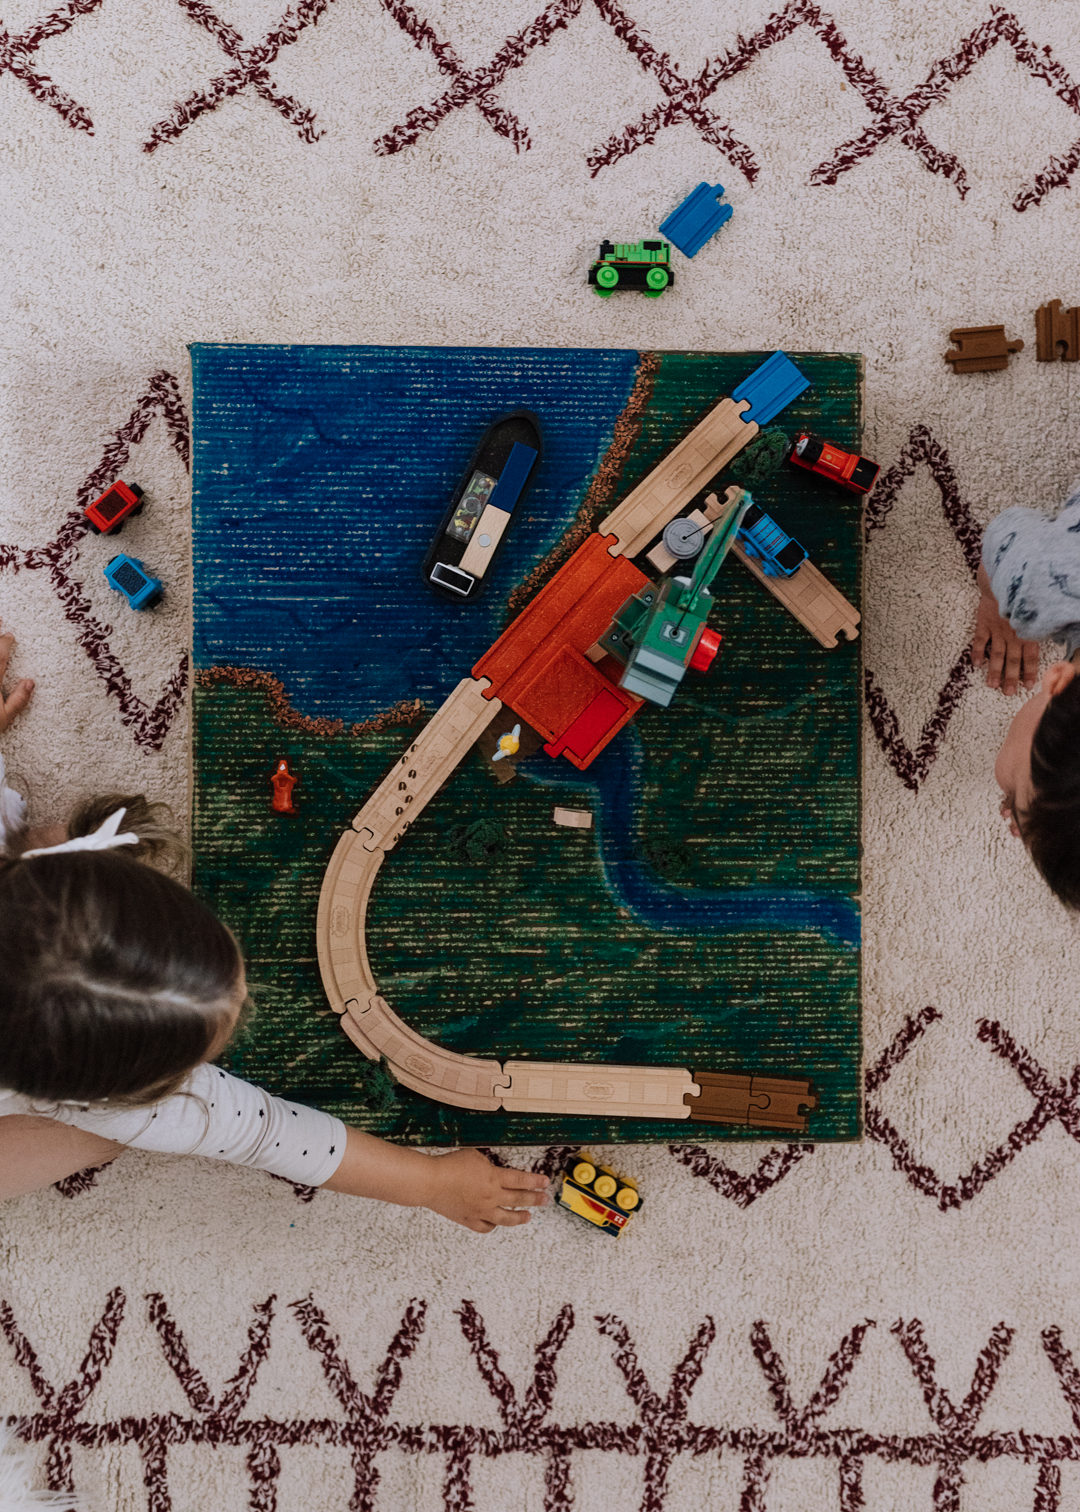 #AD When you don't want a big train table taking up space, and you have some leftover cardboard to recycle, you create your own little DIY cardboard train table for all of your favorite Thomas & Friends™ Track & Engines characters! We've partnered with Thomas & Friends™ to check out these adorable, high quality wooden trains & tracks and the kids LOVED them. More about the trains, tracks, and how we created this DIY train table are on the blog! thelovedesignedlife.com #ThomasandFriends #ThomasWood @fisherprice 